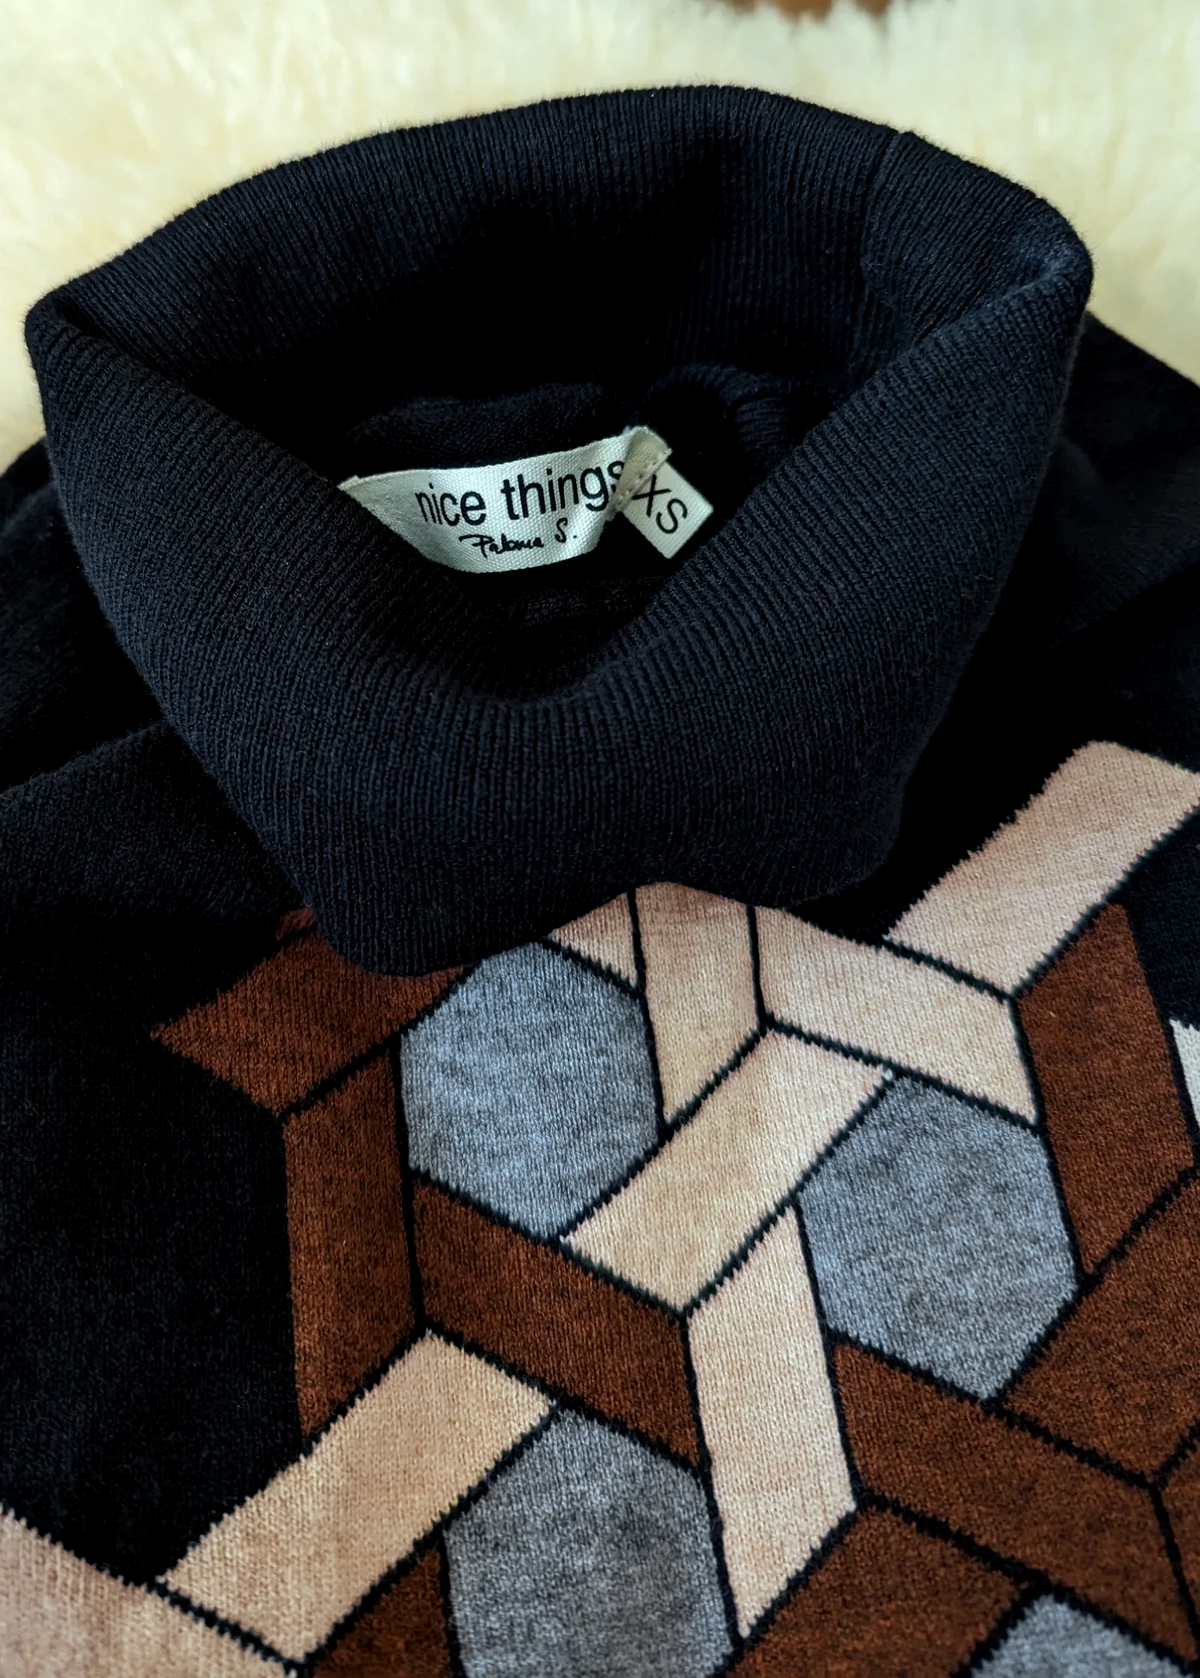 70s inspired cotton nylon wool black turtleneck knit sweater with brown, tan, and grey puzzle design at front by Nice Things by Paloma S. 